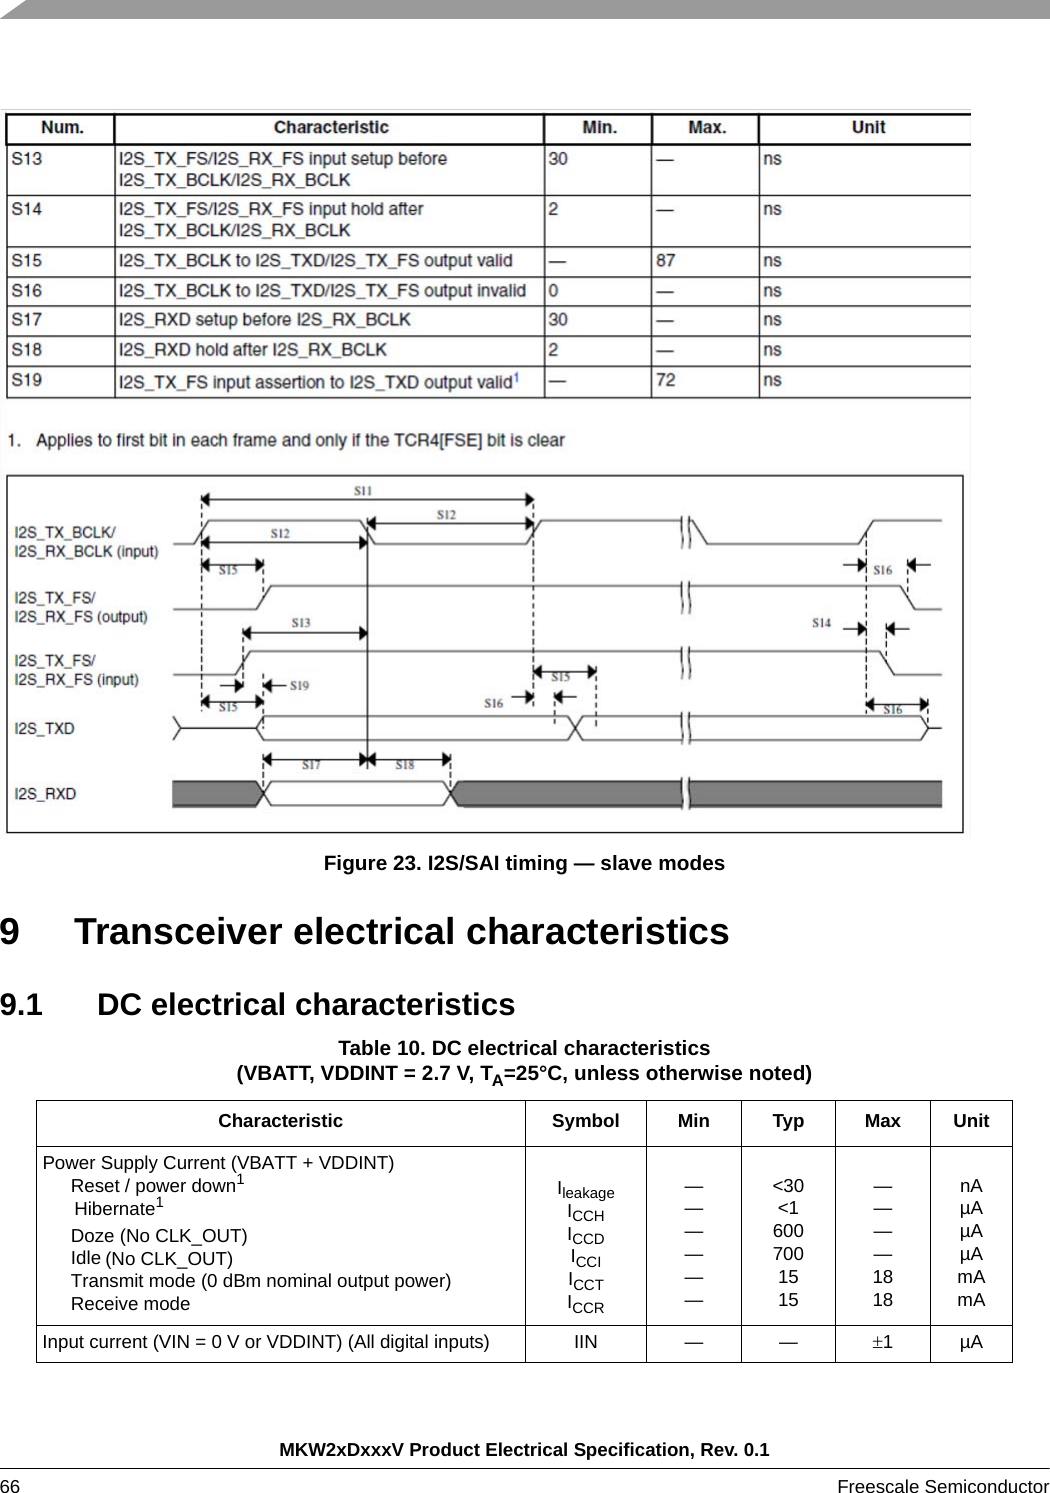 MKW2xDxxxV Product Electrical Specification, Rev. 0.166 Freescale Semiconductor Figure 23. I2S/SAI timing — slave modes9 Transceiver electrical characteristics9.1 DC electrical characteristicsTable 10. DC electrical characteristics (VBATT, VDDINT = 2.7 V, TA=25°C, unless otherwise noted)Characteristic Symbol Min Typ Max UnitPower Supply Current (VBATT + VDDINT)Reset / power down1 Hibernate1Doze (No CLK_OUT)Idle (No CLK_OUT)Transmit mode (0 dBm nominal output power)Receive modeIleakageICCHICCDICCIICCTICCR——————&lt;30&lt;16007001515————1818nAµAµAµAmAmAInput current (VIN = 0 V or VDDINT) (All digital inputs) IIN — — 1µA